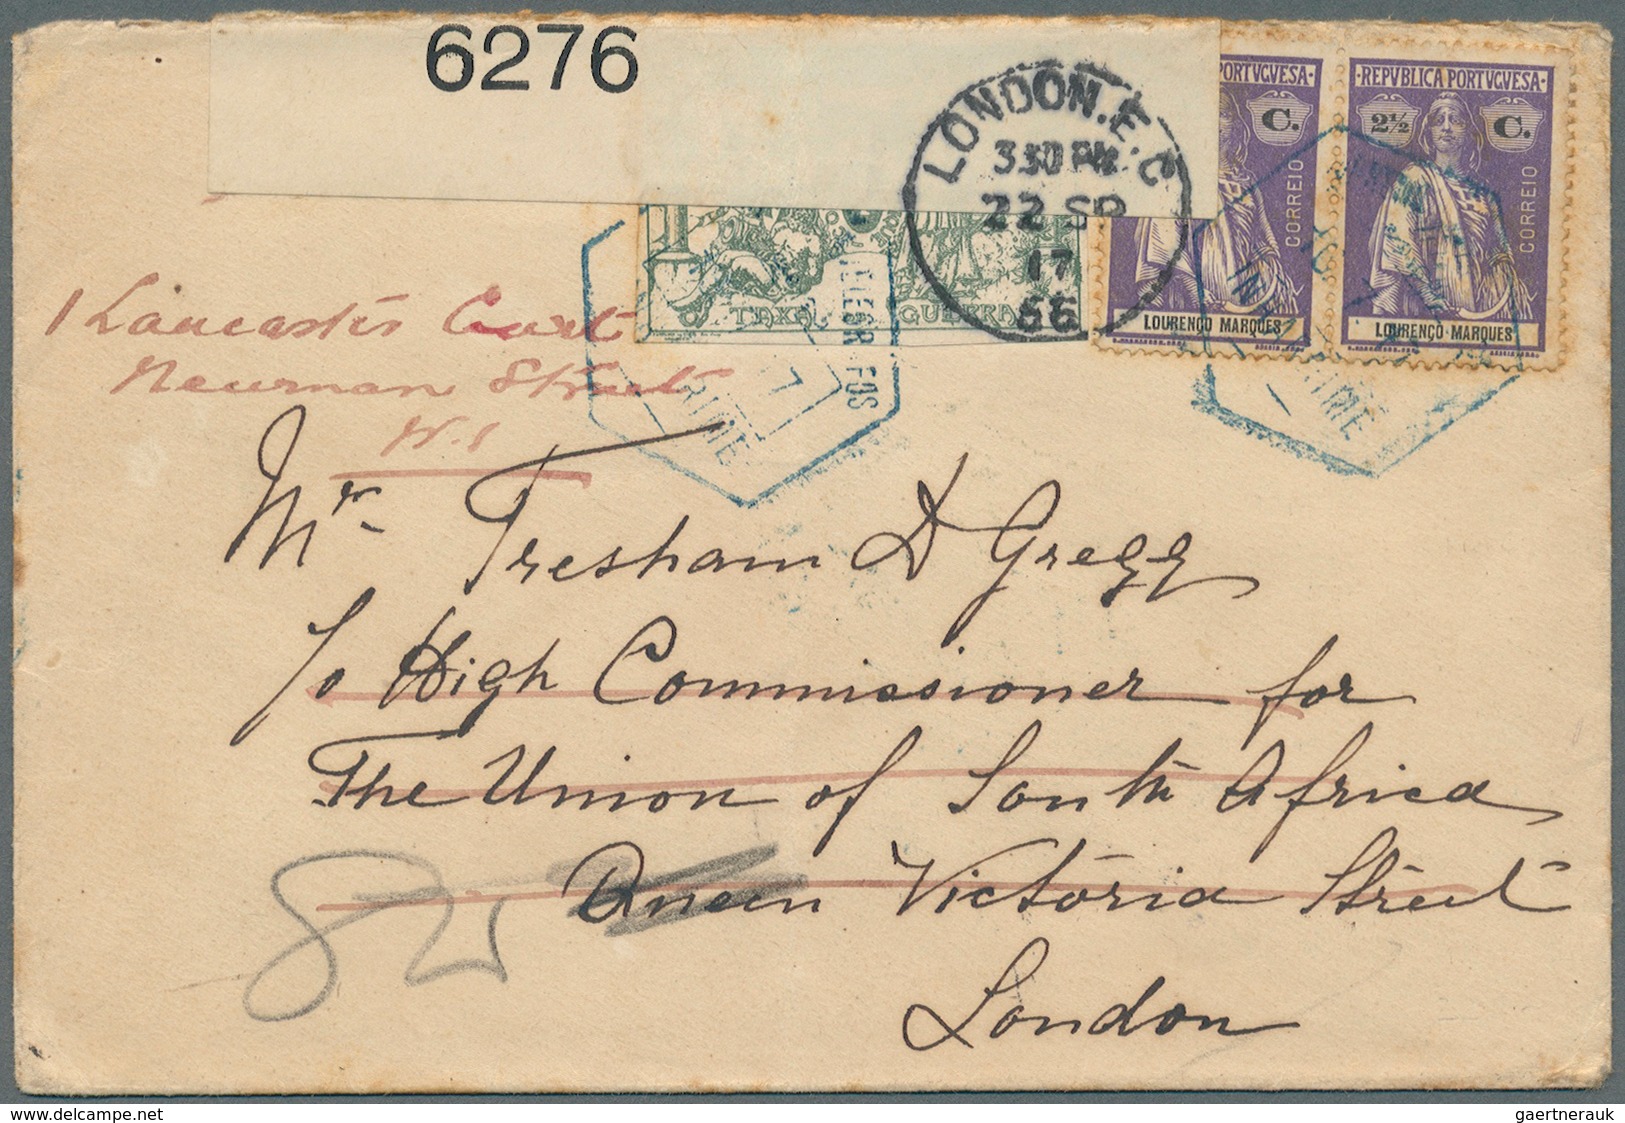 23669 Mocambique: 1895/1917, Mocambique/Area, group of eleven better entires with many attractive franking